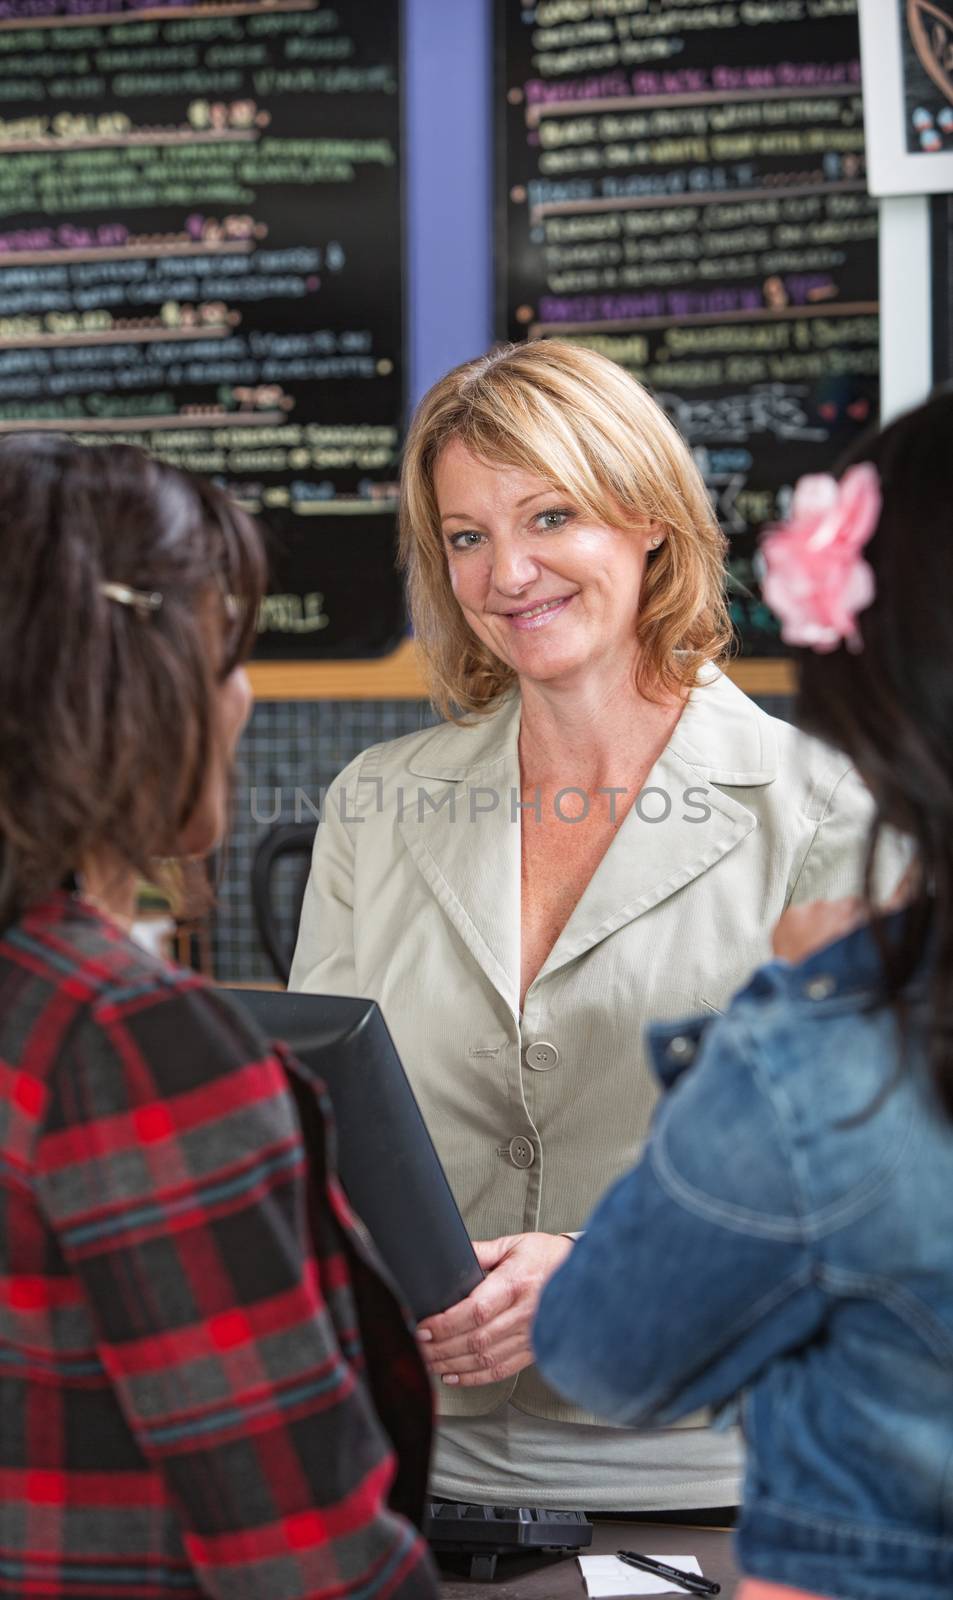 Cheerful restaurant owner at counter with customers